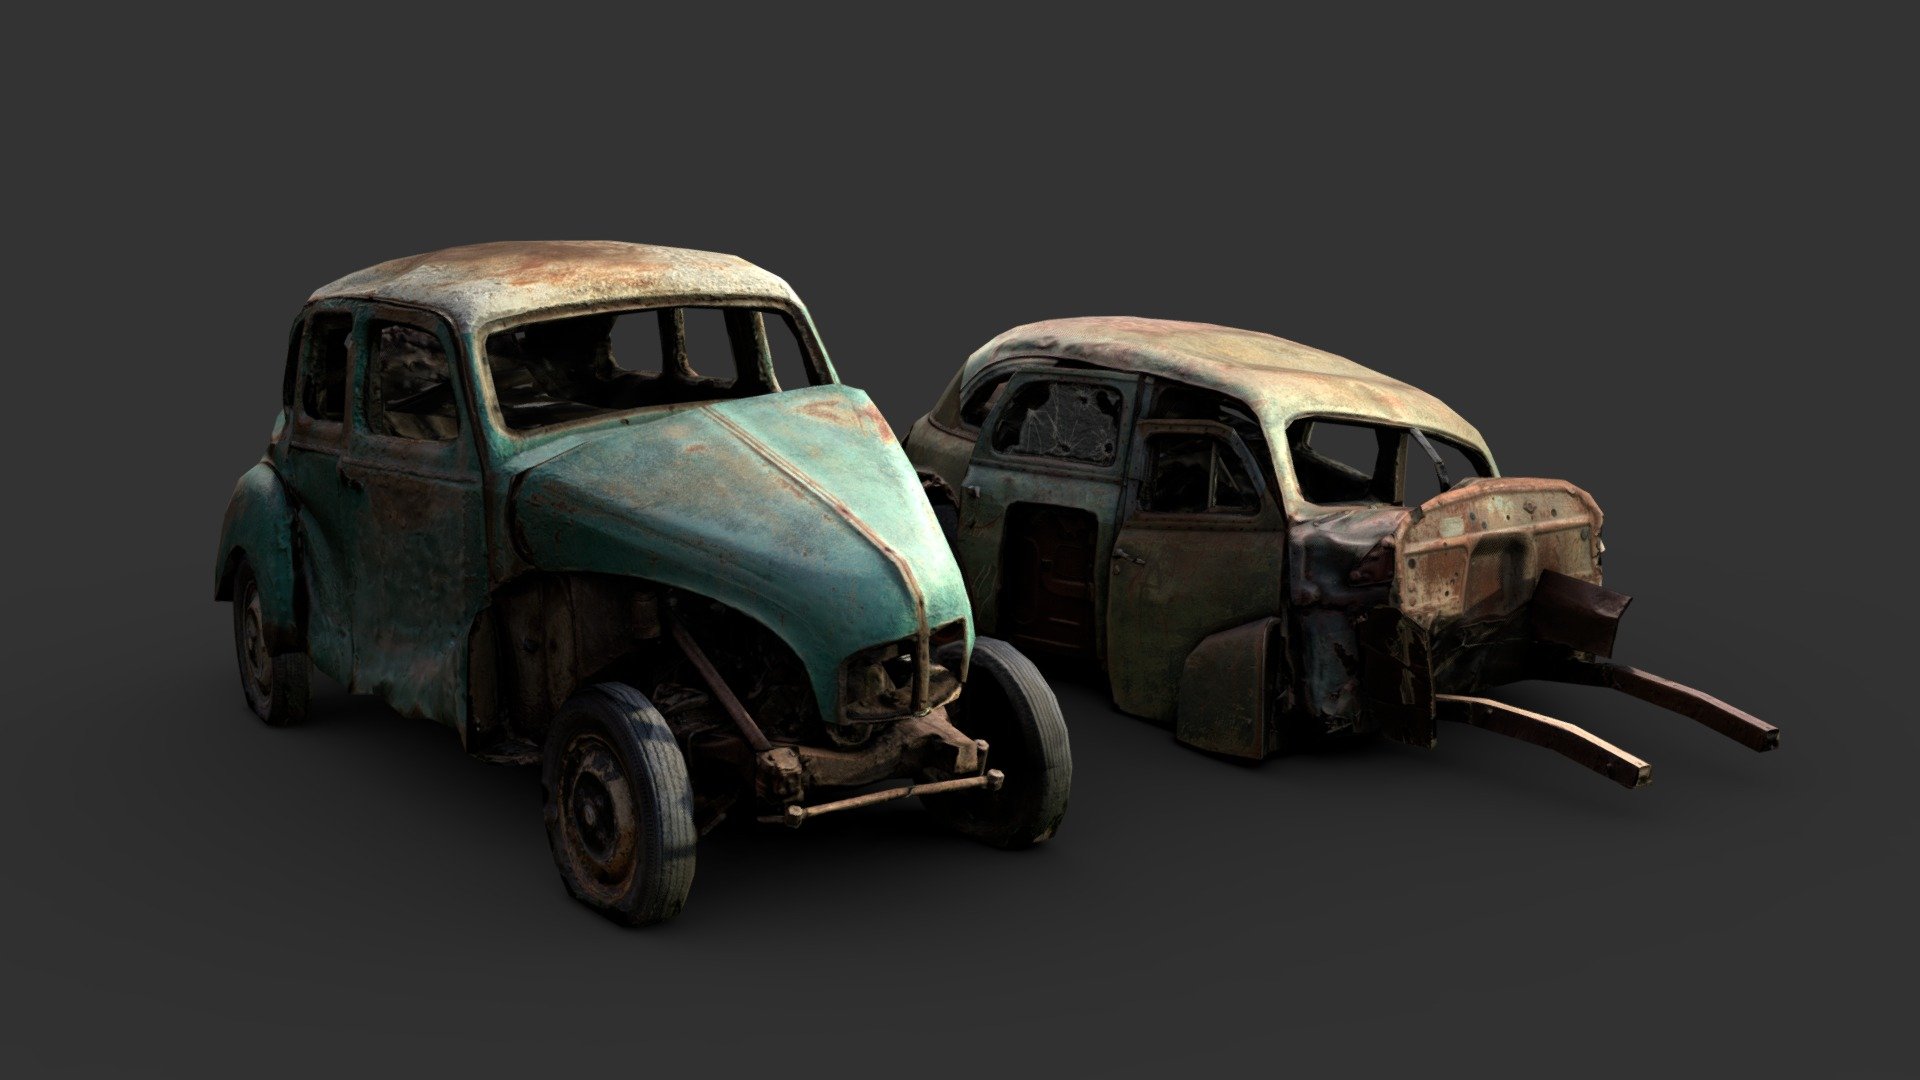 Even if you combined them, I doubt you'd have a whole car. Gameready models based on 3D scan data provided by https://sketchfab.com/chrisbischoff

Made in Realitycapture, 3dsmax, Topogun, and Substance Painter 3d model